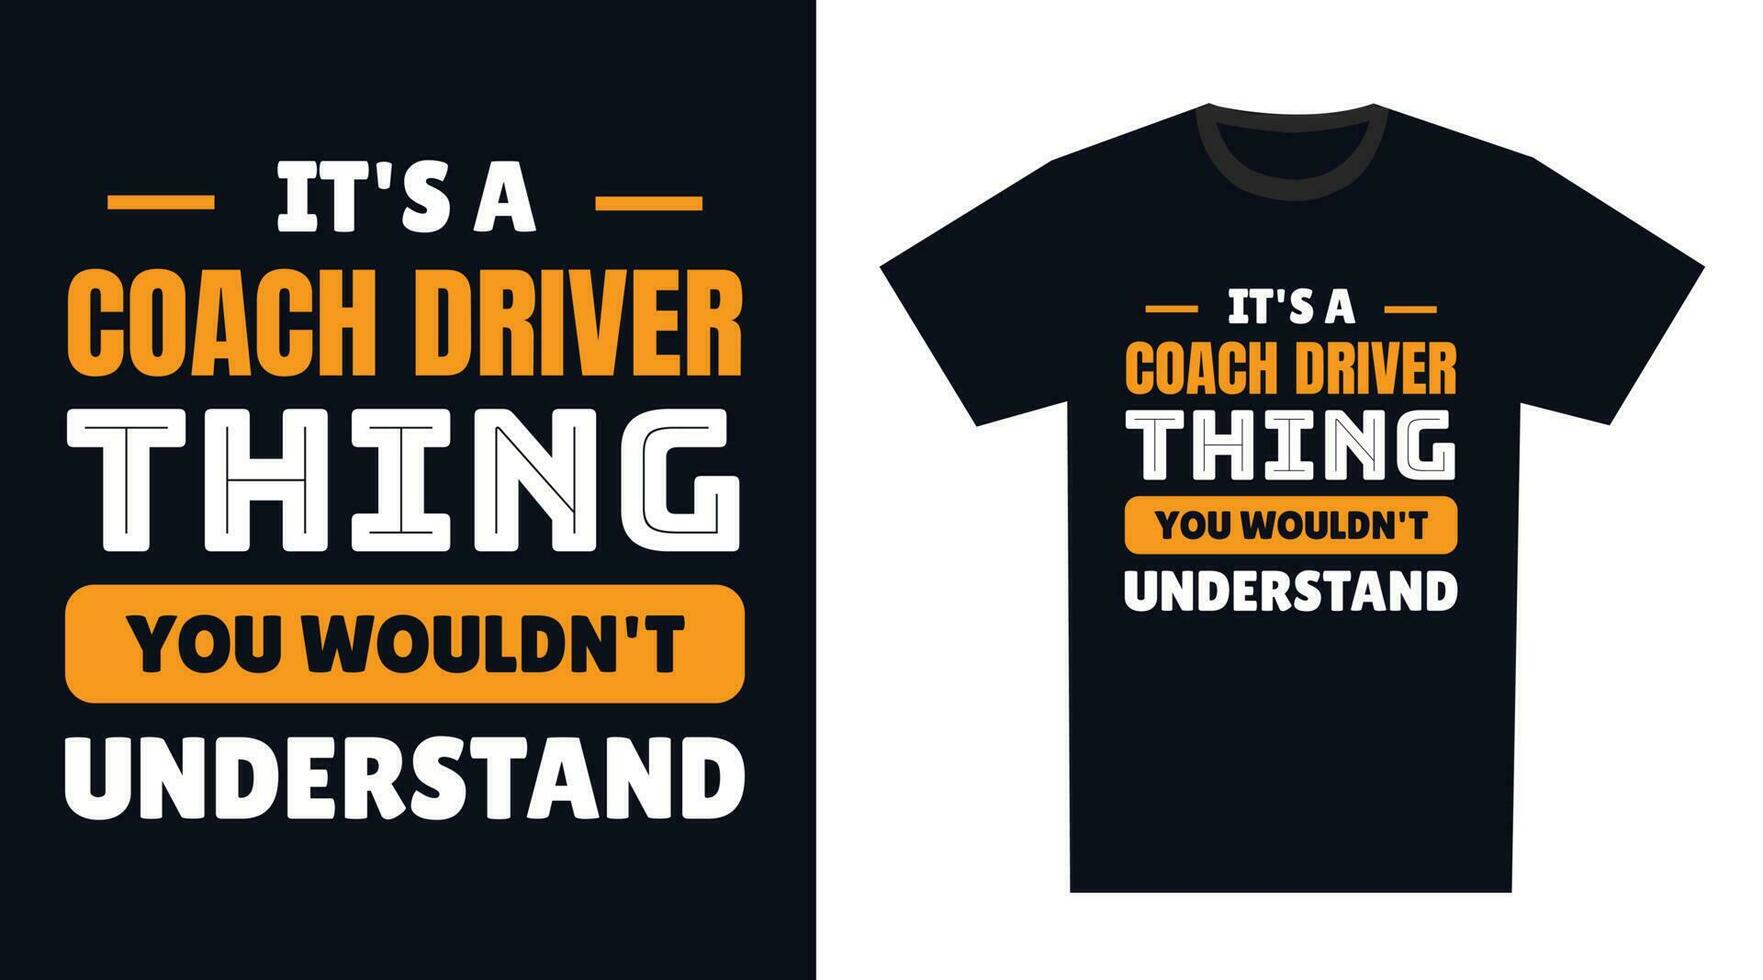 Coach Driver T Shirt Design. It's a Coach Driver Thing, You Wouldn't Understand vector